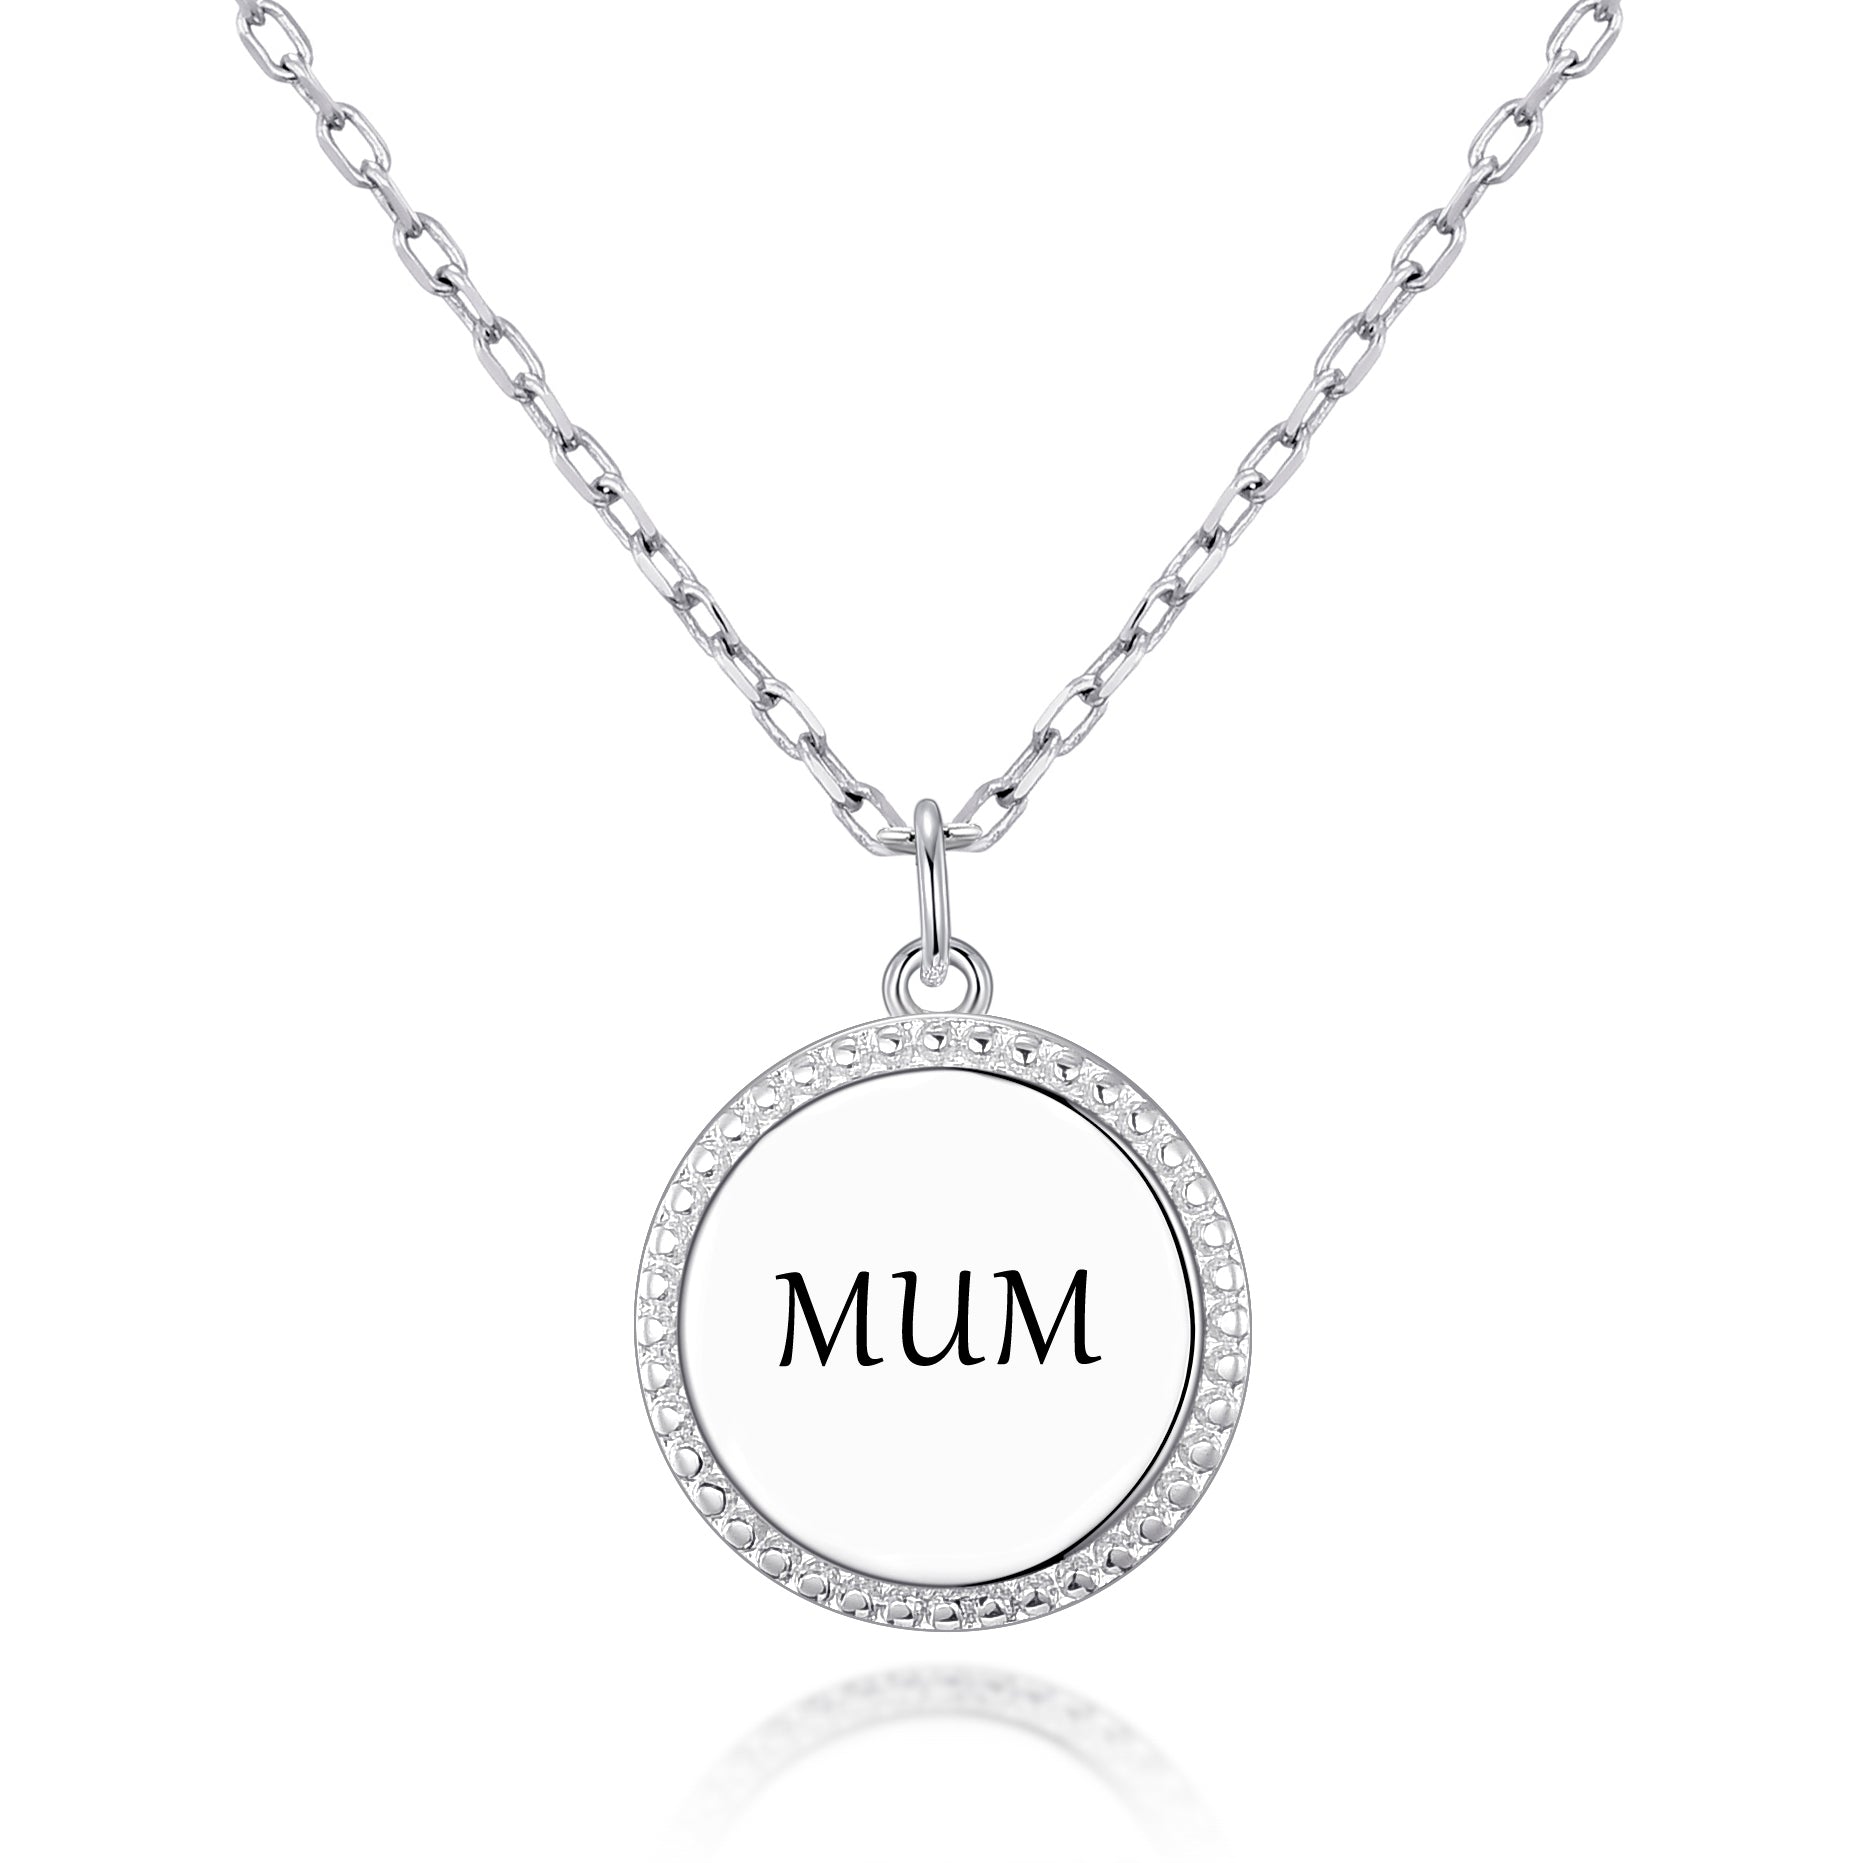 Silver Plated Filigree Disc Mum Necklace by Philip Jones Jewellery